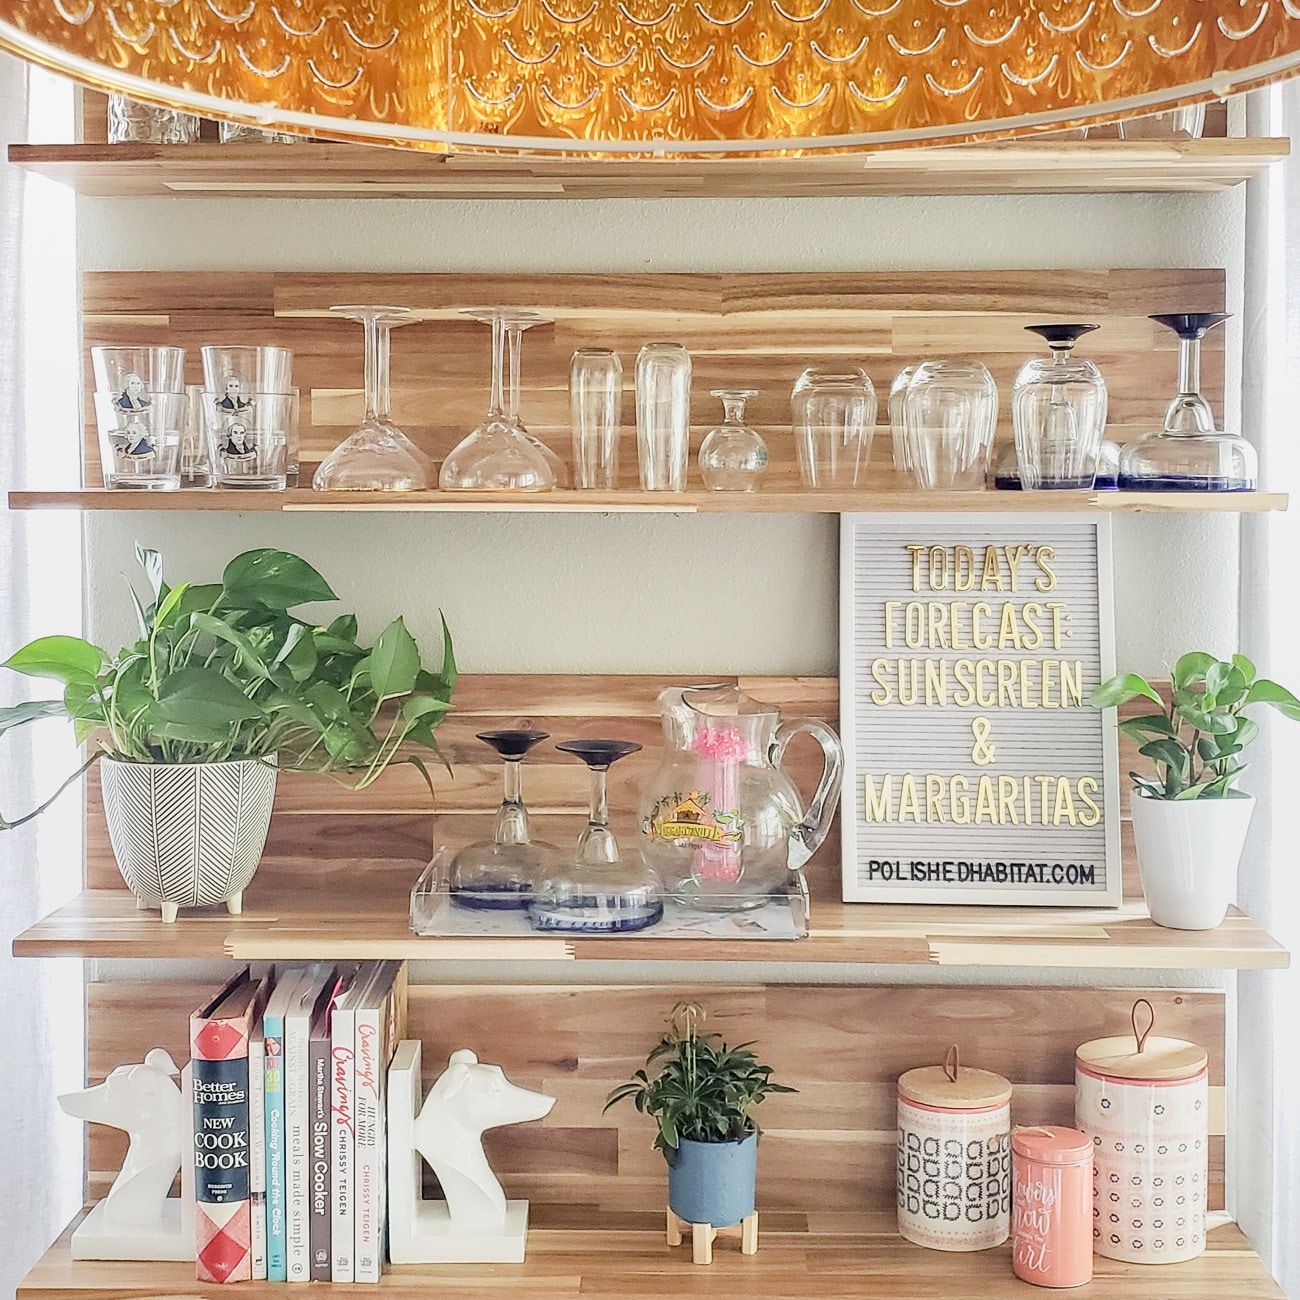 Wood kitchen shelves with glassware and white letter board with gold letters saying "Today's Forecast: Sunshine & Margaritas"